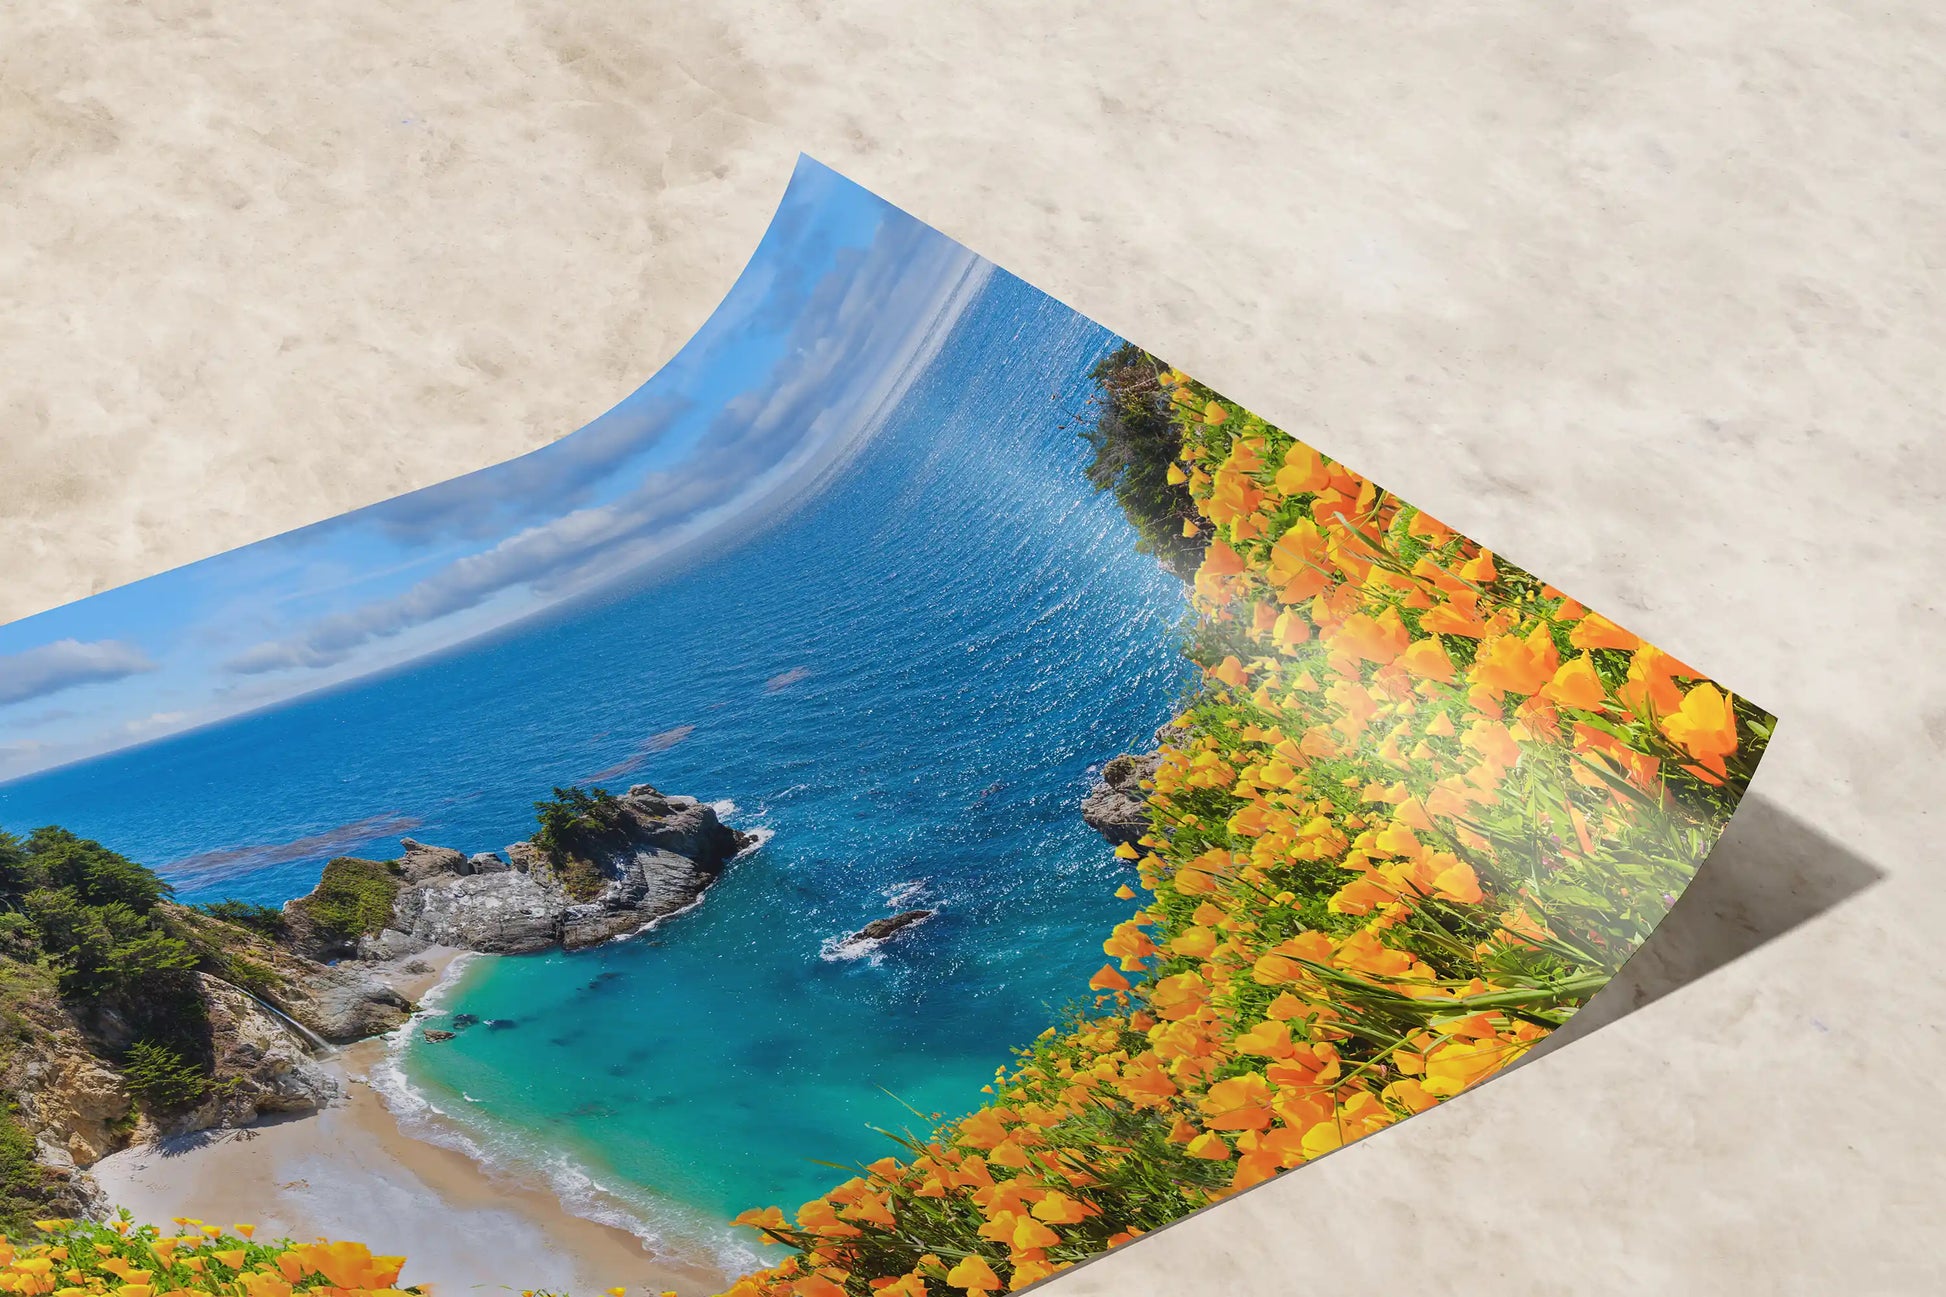 A paper print detail to reveal a vibrant image of McWay Falls at Big Sur with bright yellow flowers in the foreground on a table.